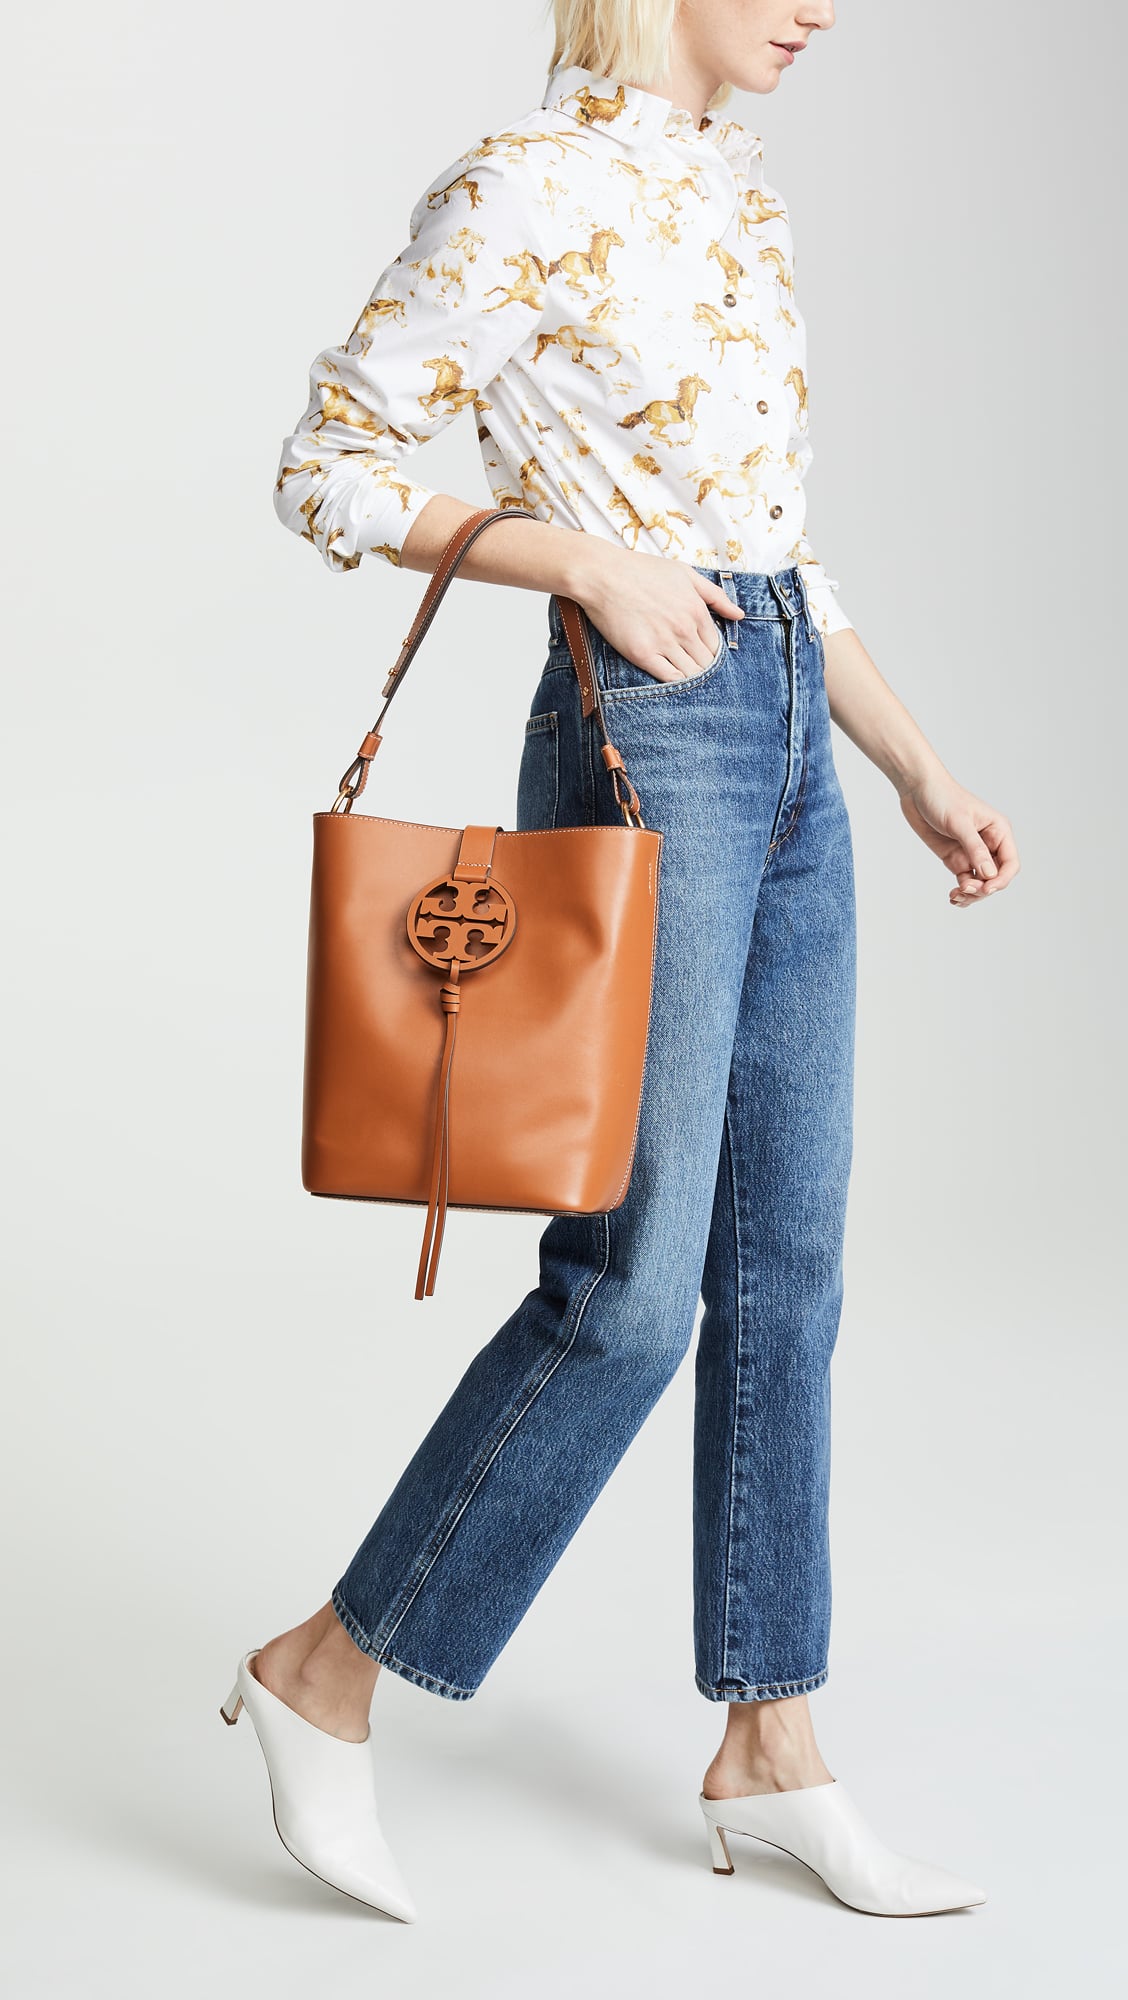 Best designer bags of 2019, that you'll still carry in 2020